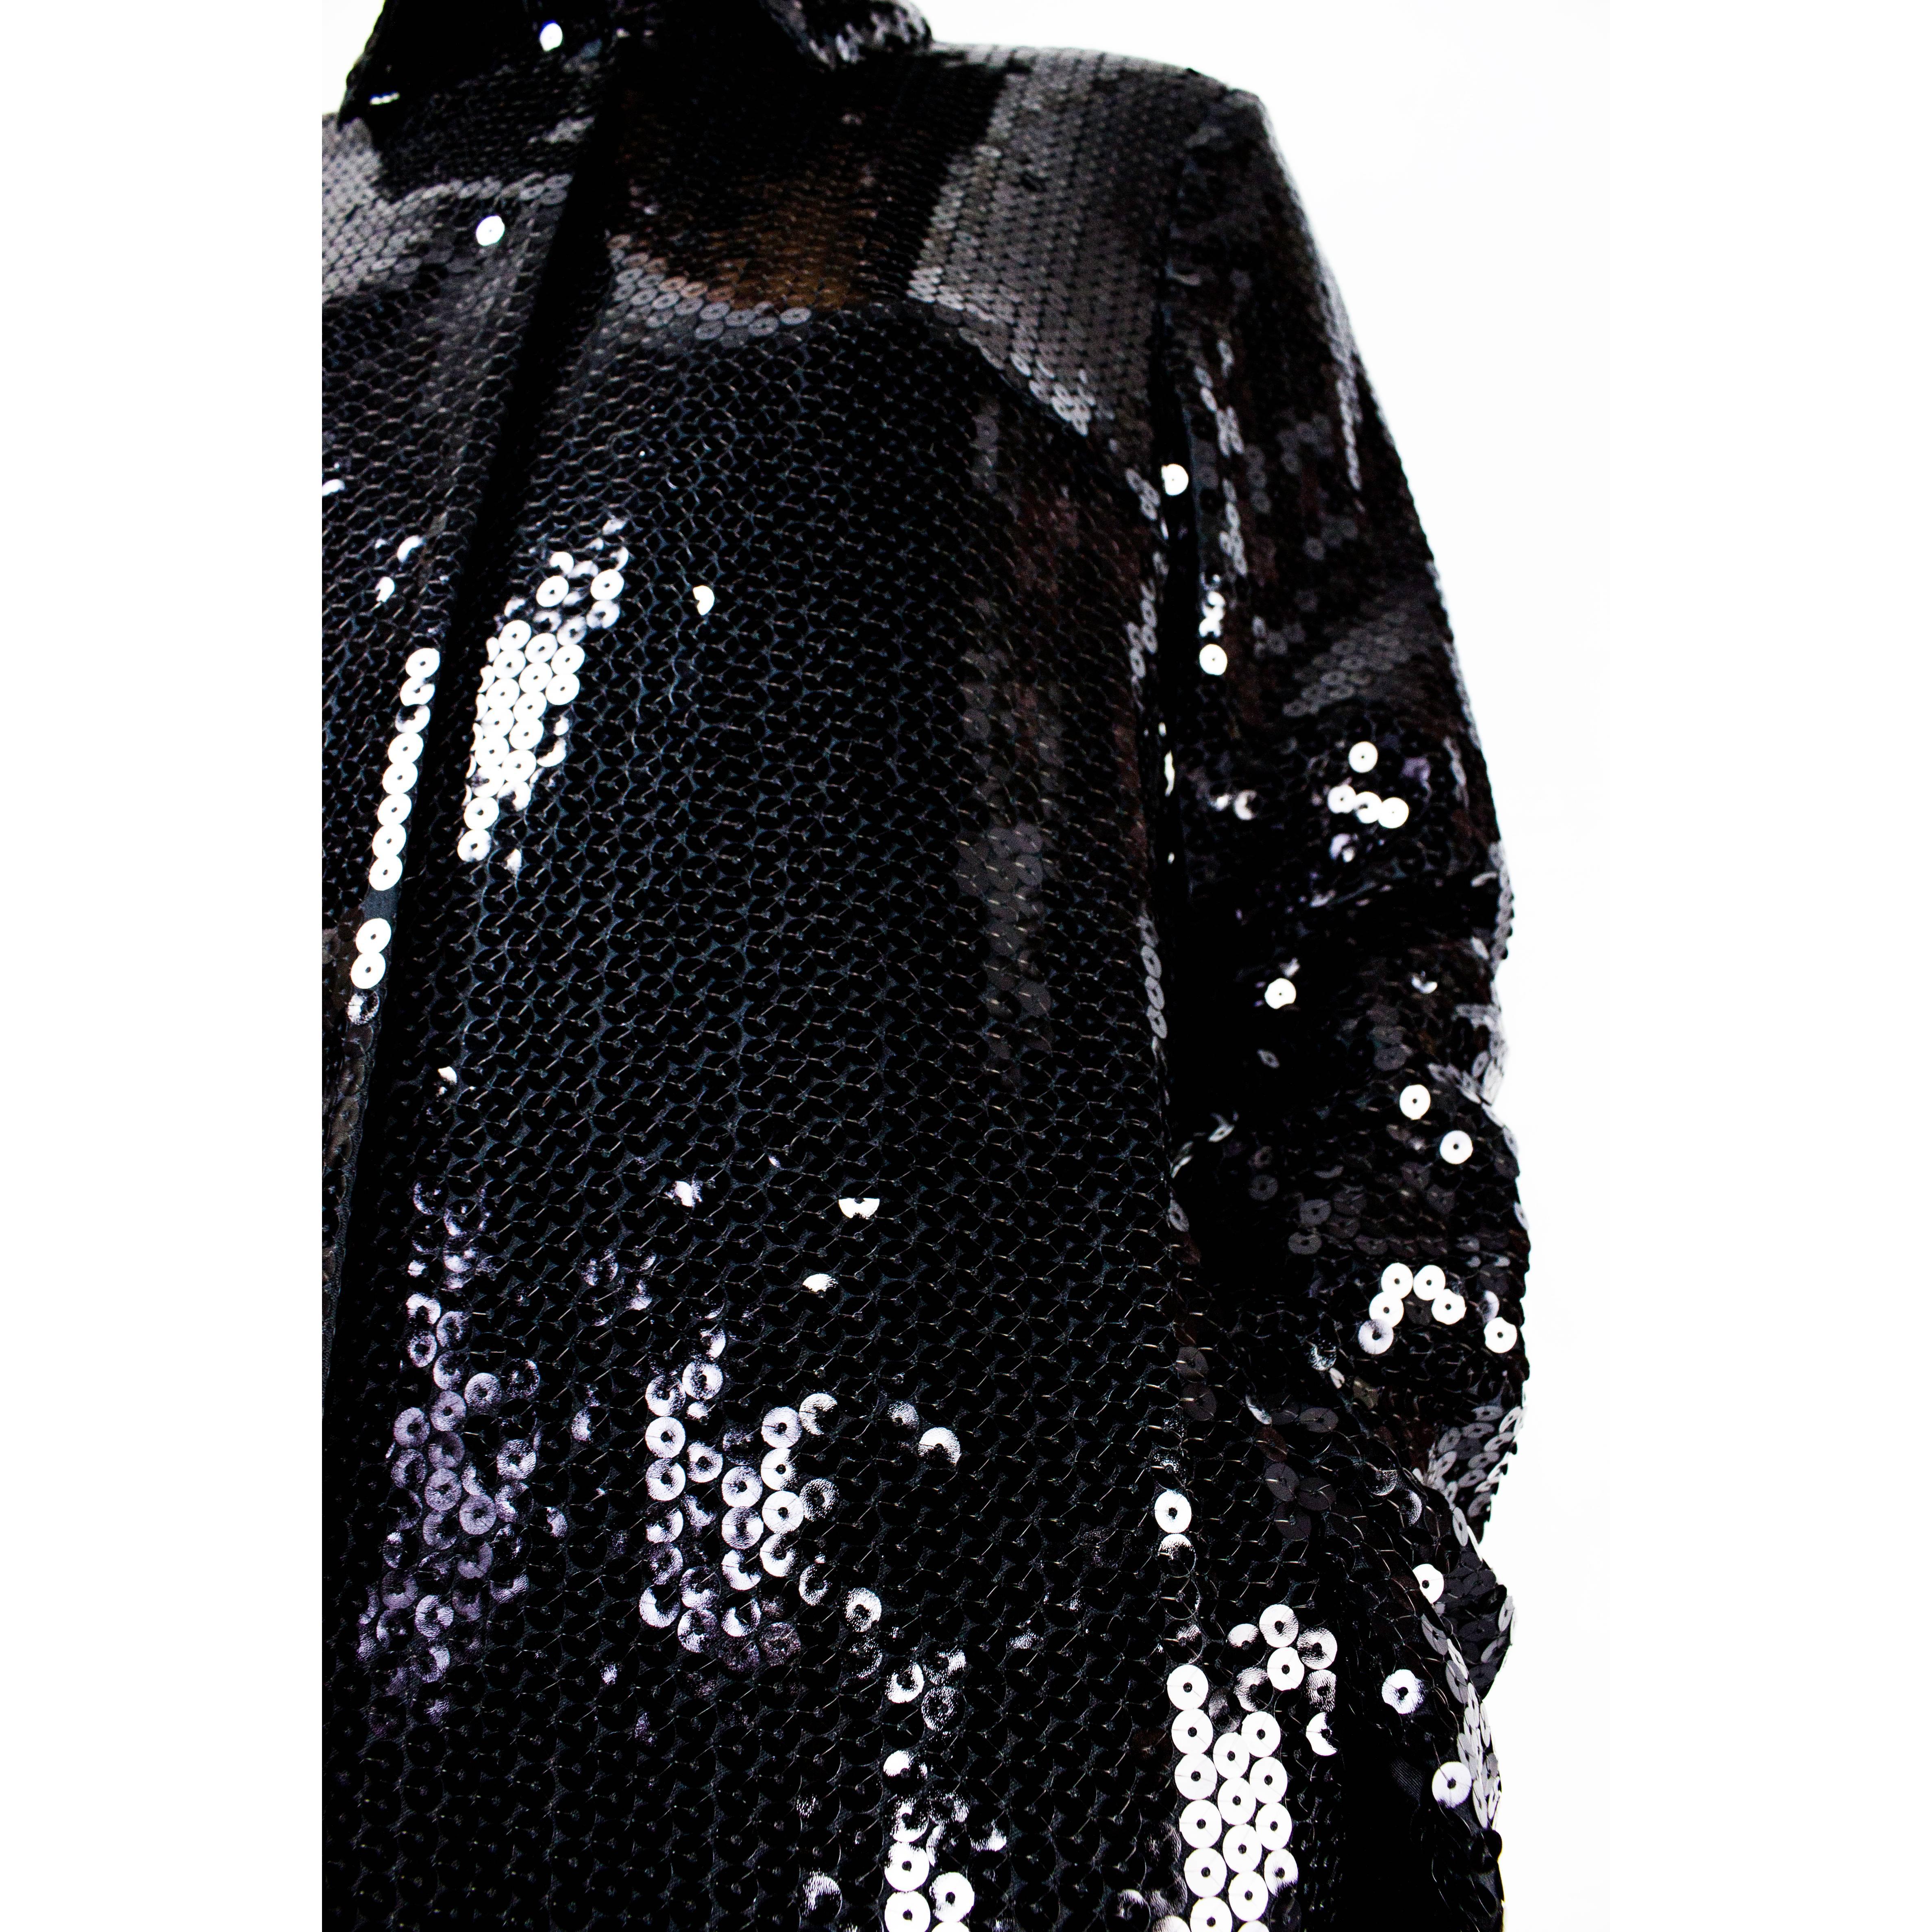 Dolce & Gabbana black sequin evening coat, Fall/winter 2012-2013 In Excellent Condition For Sale In London, GB